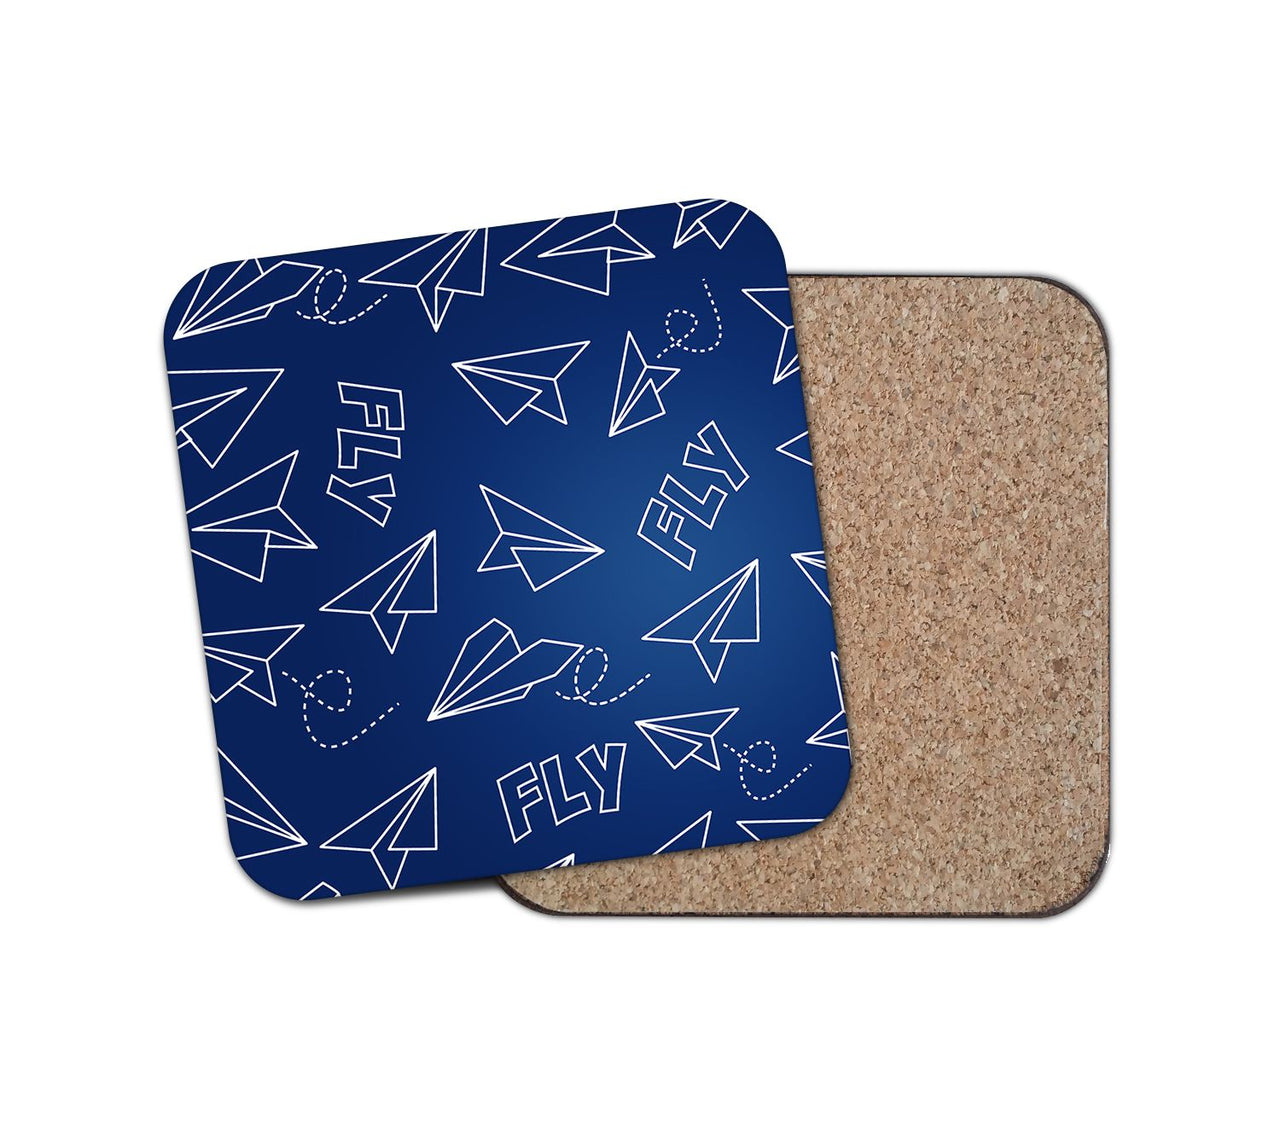 Paper Airplane & Fly (Blue) Designed Coasters